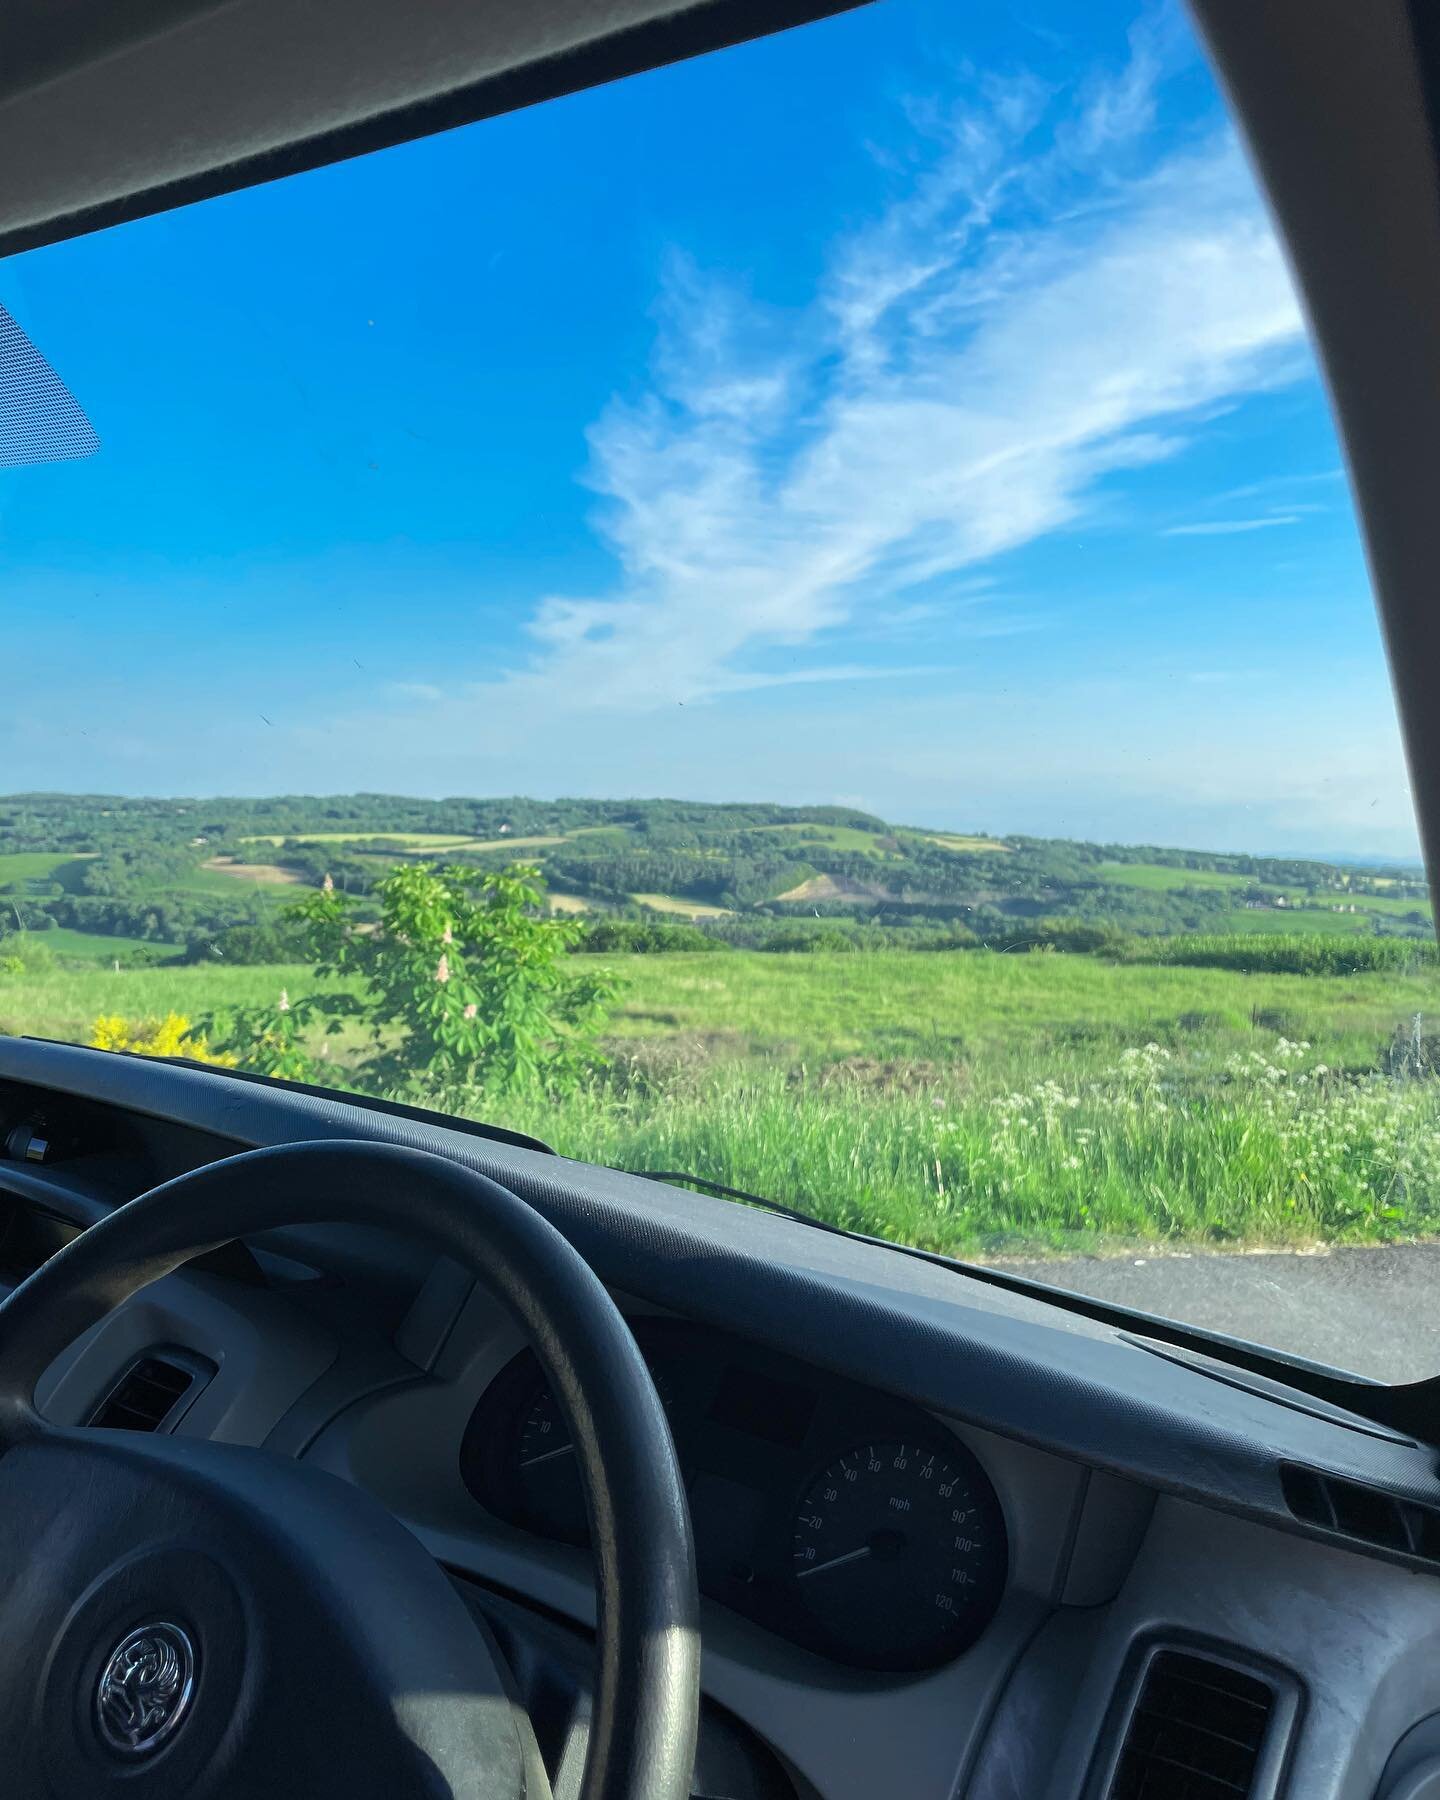 FROM MY VAN 🚐😁 I&rsquo;m making lots of van adventure plans after collecting my van the other day. Thanks 🙏 for al the lovey messages about it 😊

Video is on YouTube if you haven&rsquo;t seen it yet of the process of buying the van and going to c